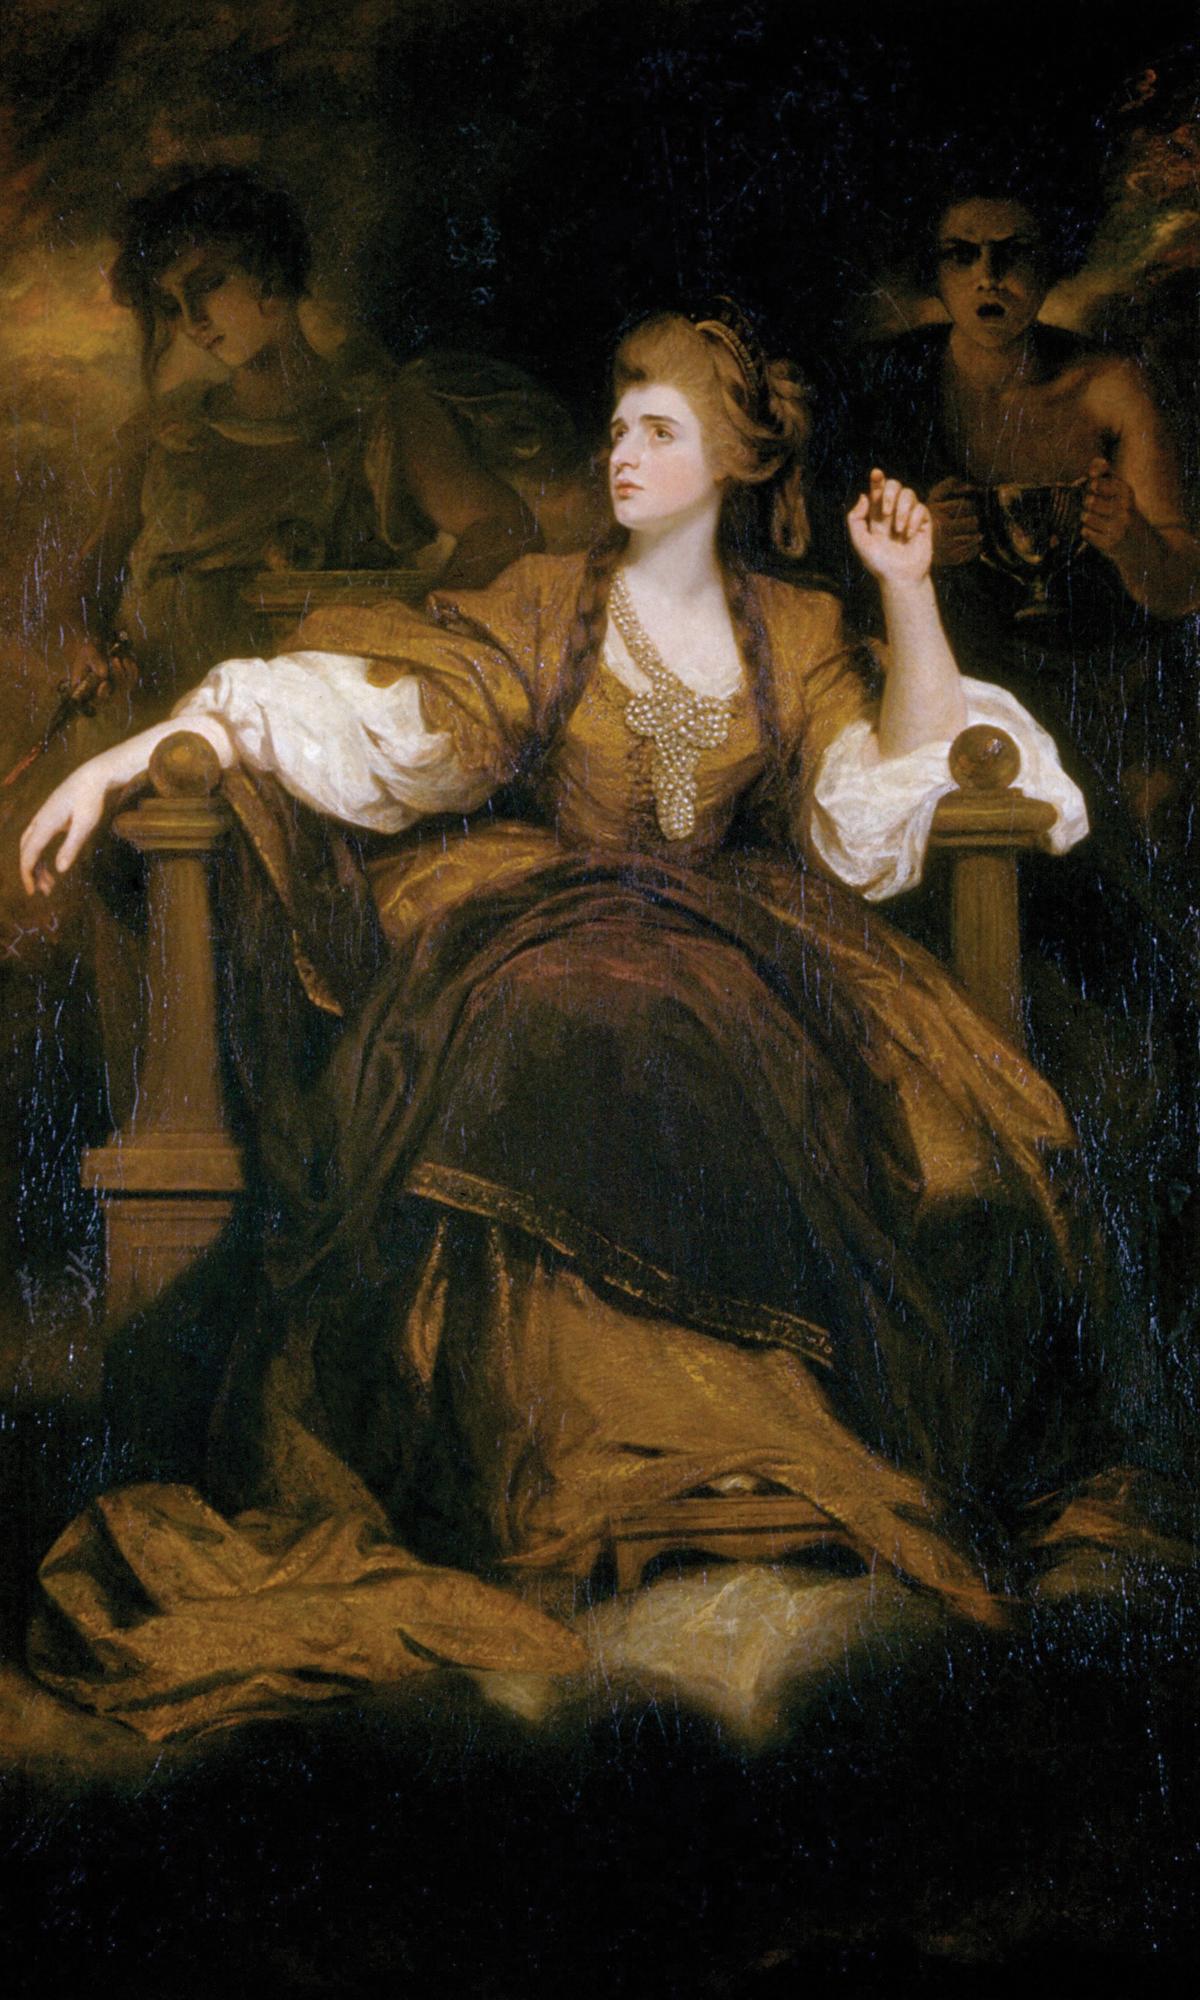 Siddons looks off into the distance, seated in a wooden armchair, dressed in a long white, gold, and bronze dress, with a large pearl necklace around her neck